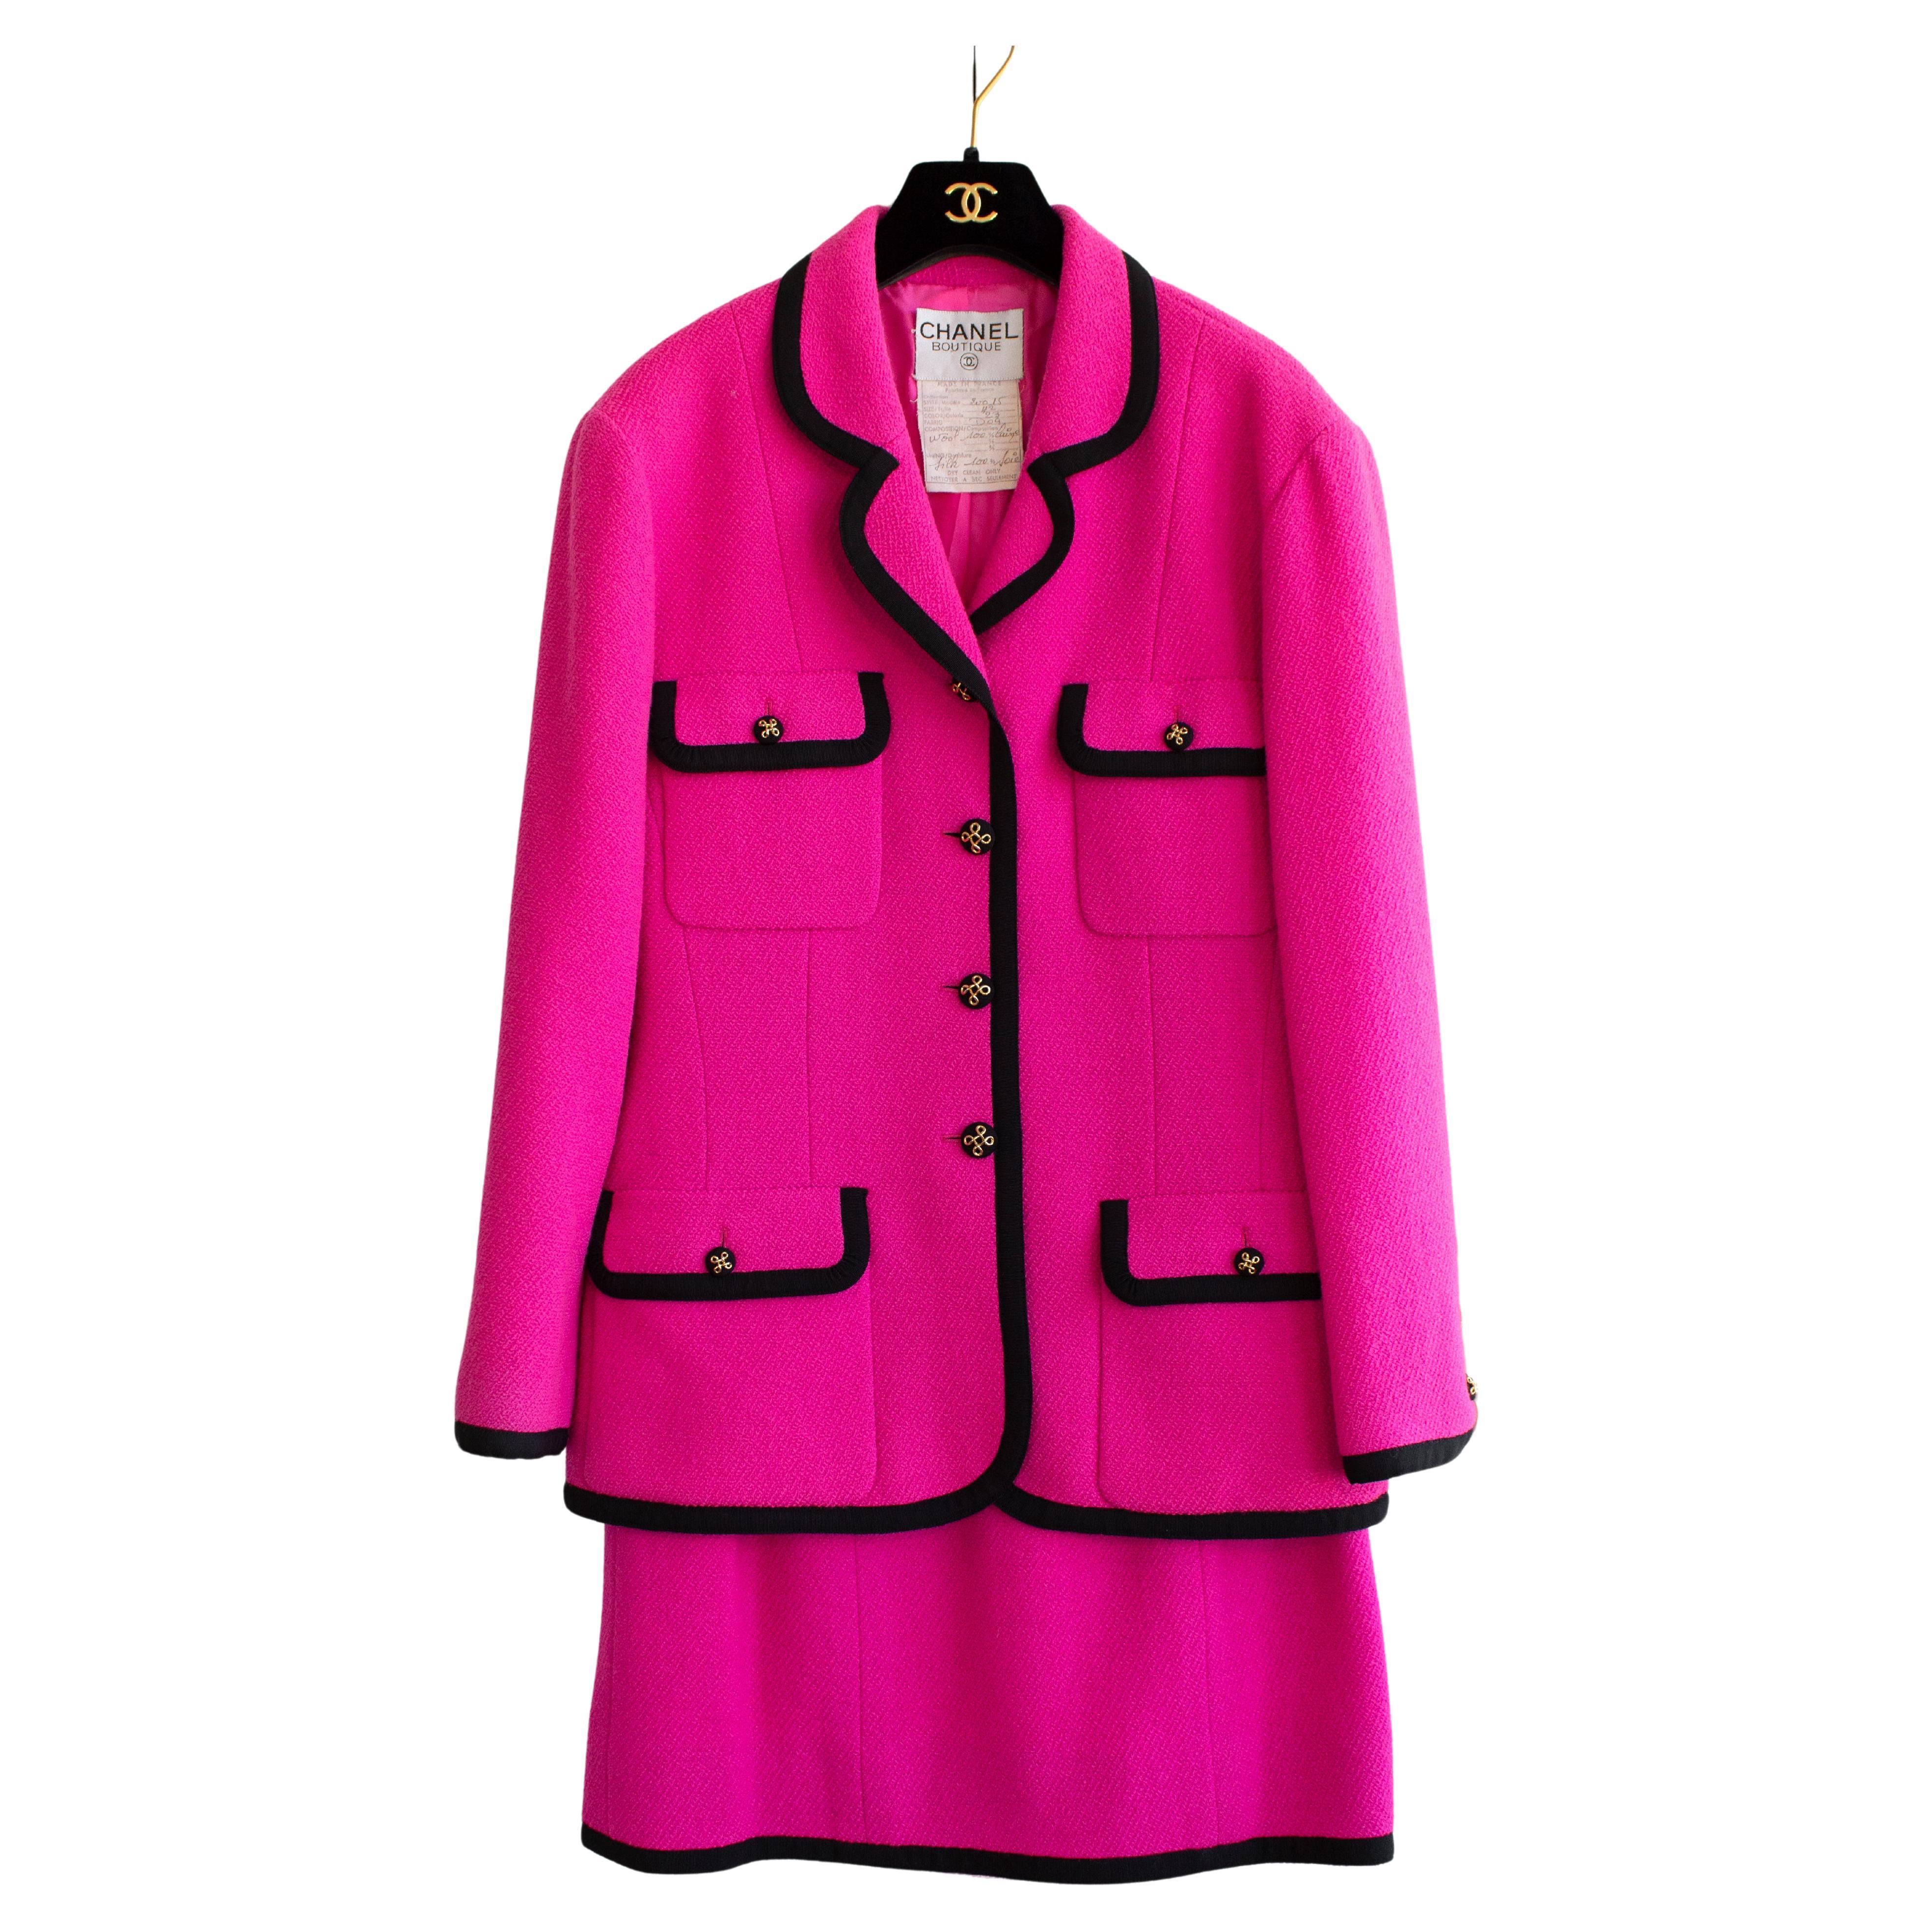 Chanel Vintage S/S 1991 Collector Fuchsia Pink Black Wool Jacket Skirt Suit For Sale